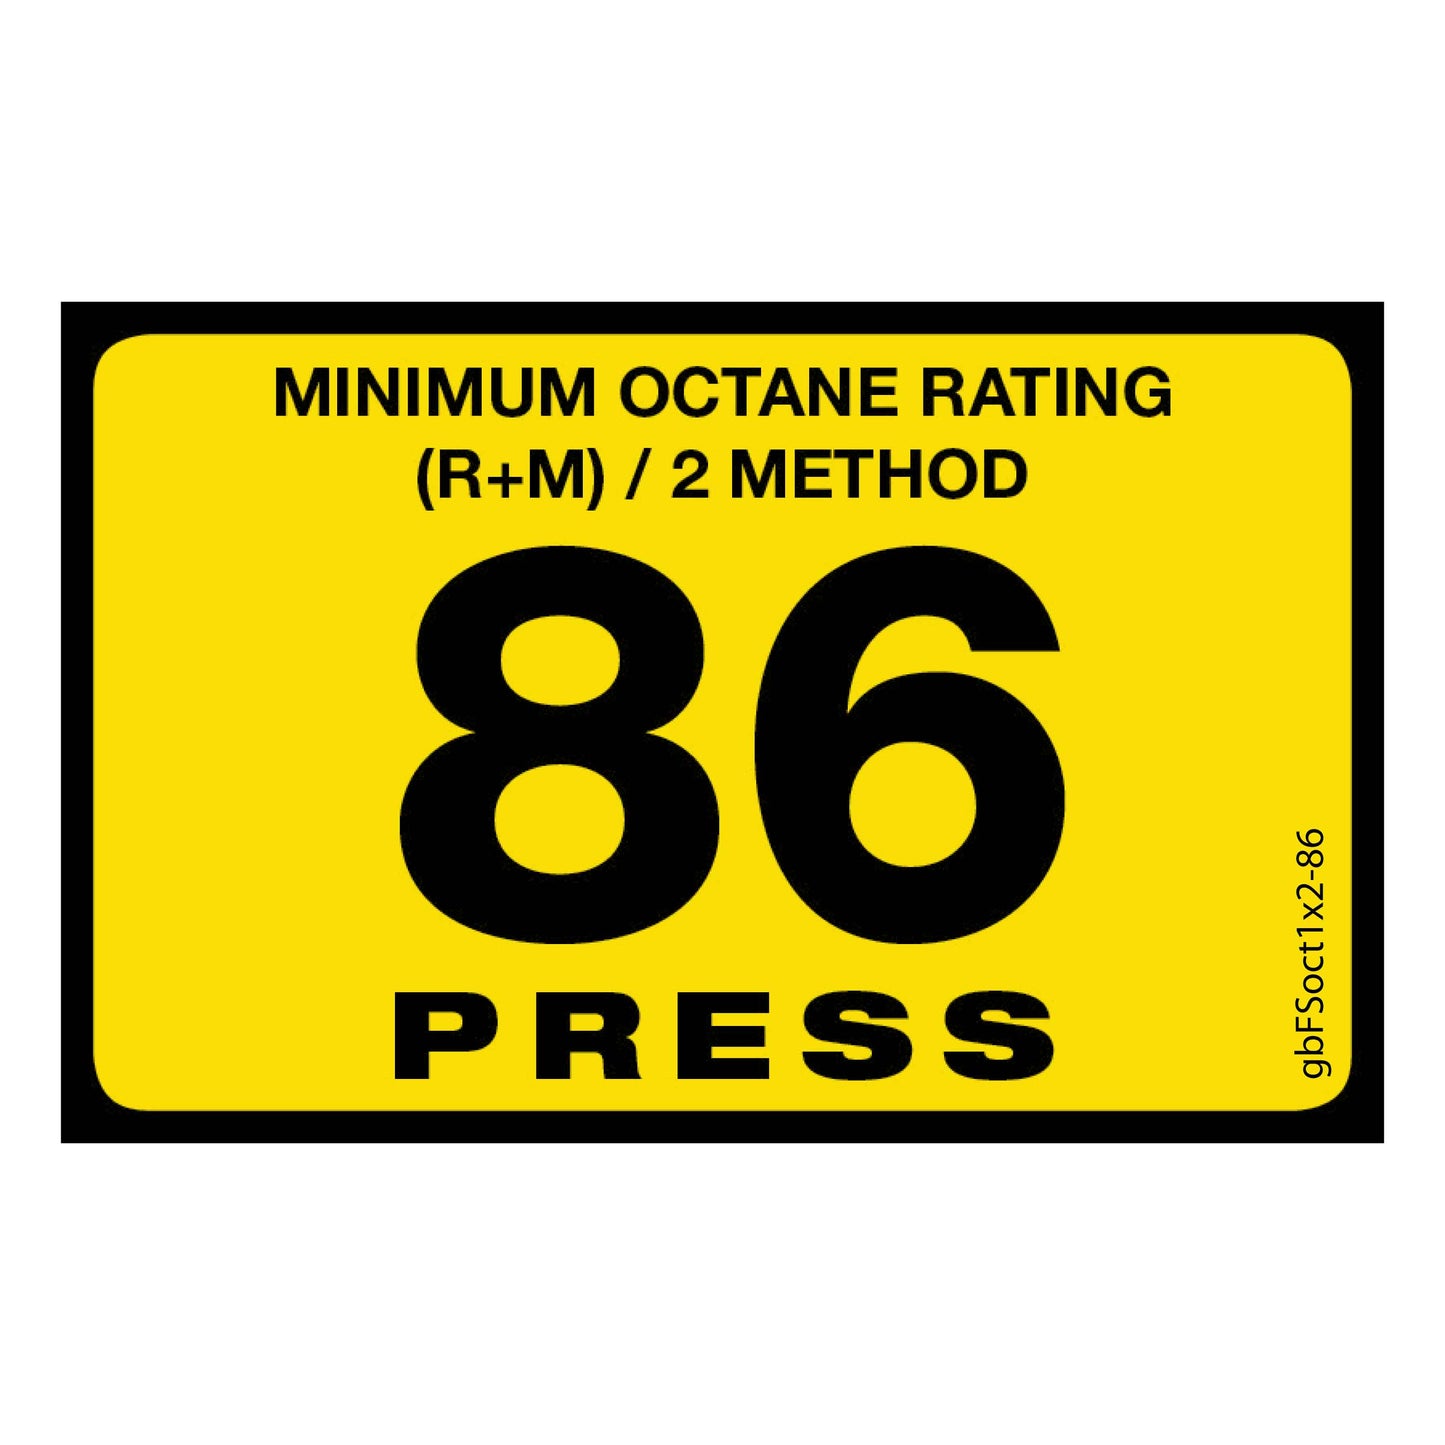 86 Press Octane Rating Decal. 1 inch by 2 inches in size. 